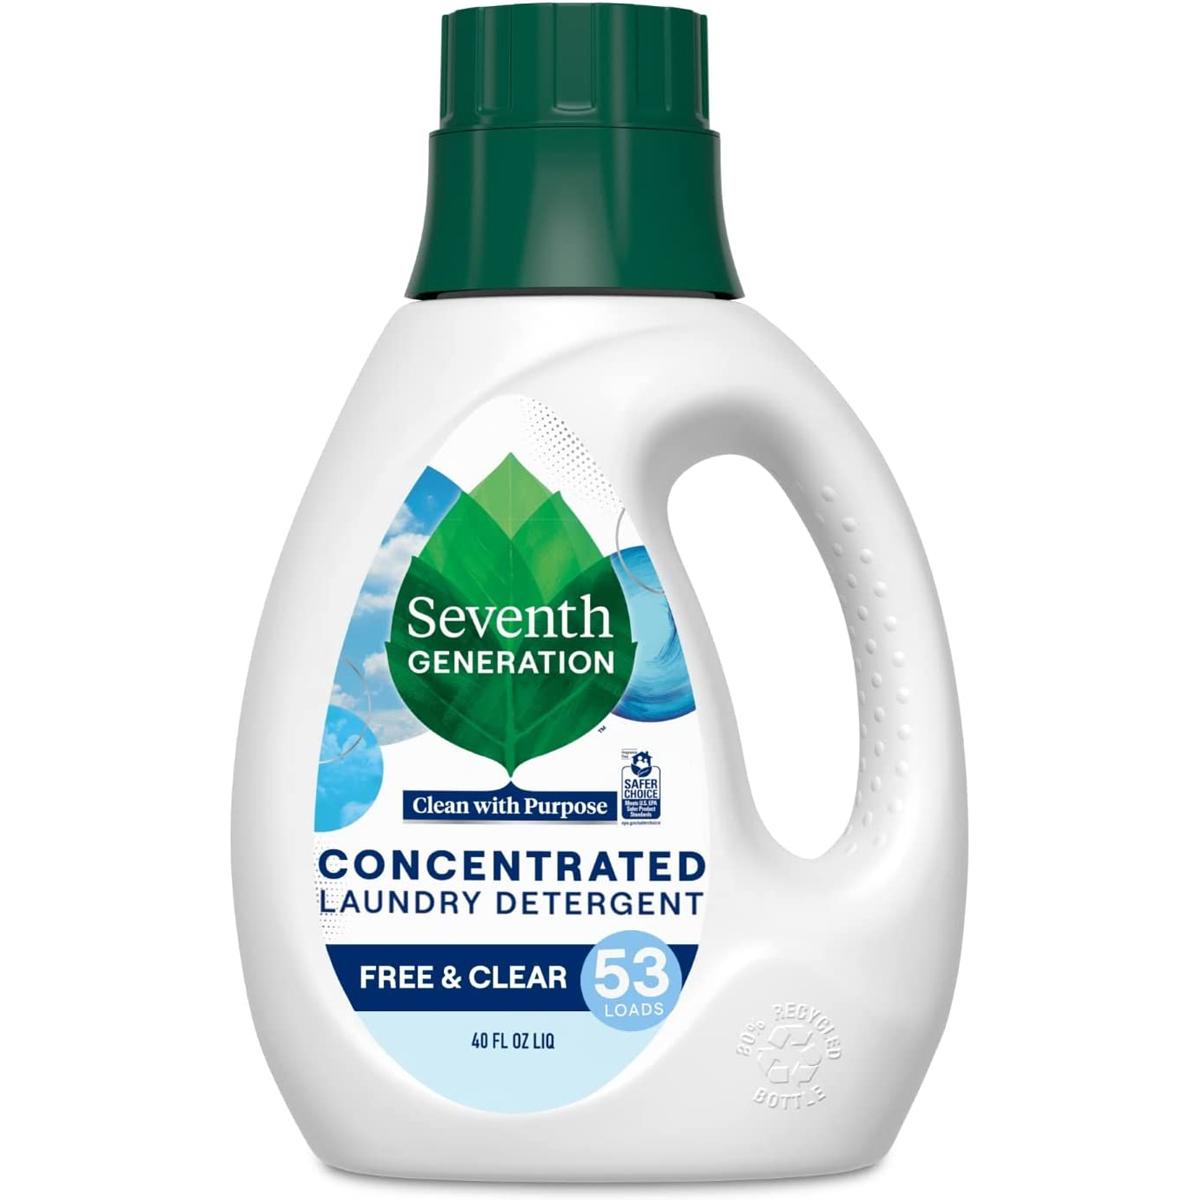 Seventh Generation Concentrated Laundry Detergent Liquid for $6.33 Shipped